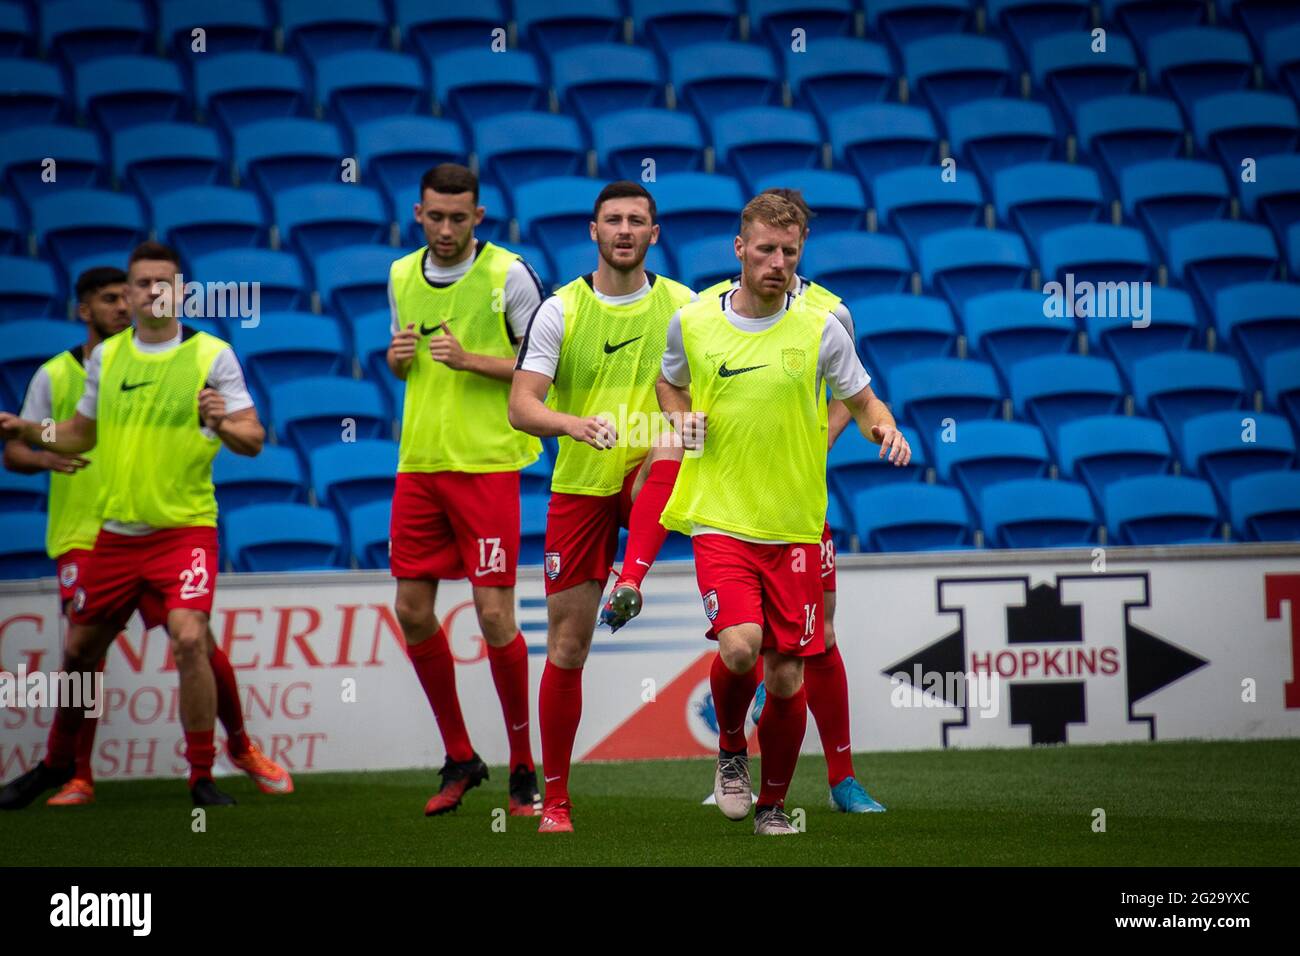 Cardiff City Stadium could host Nomads' Champions League qualifier